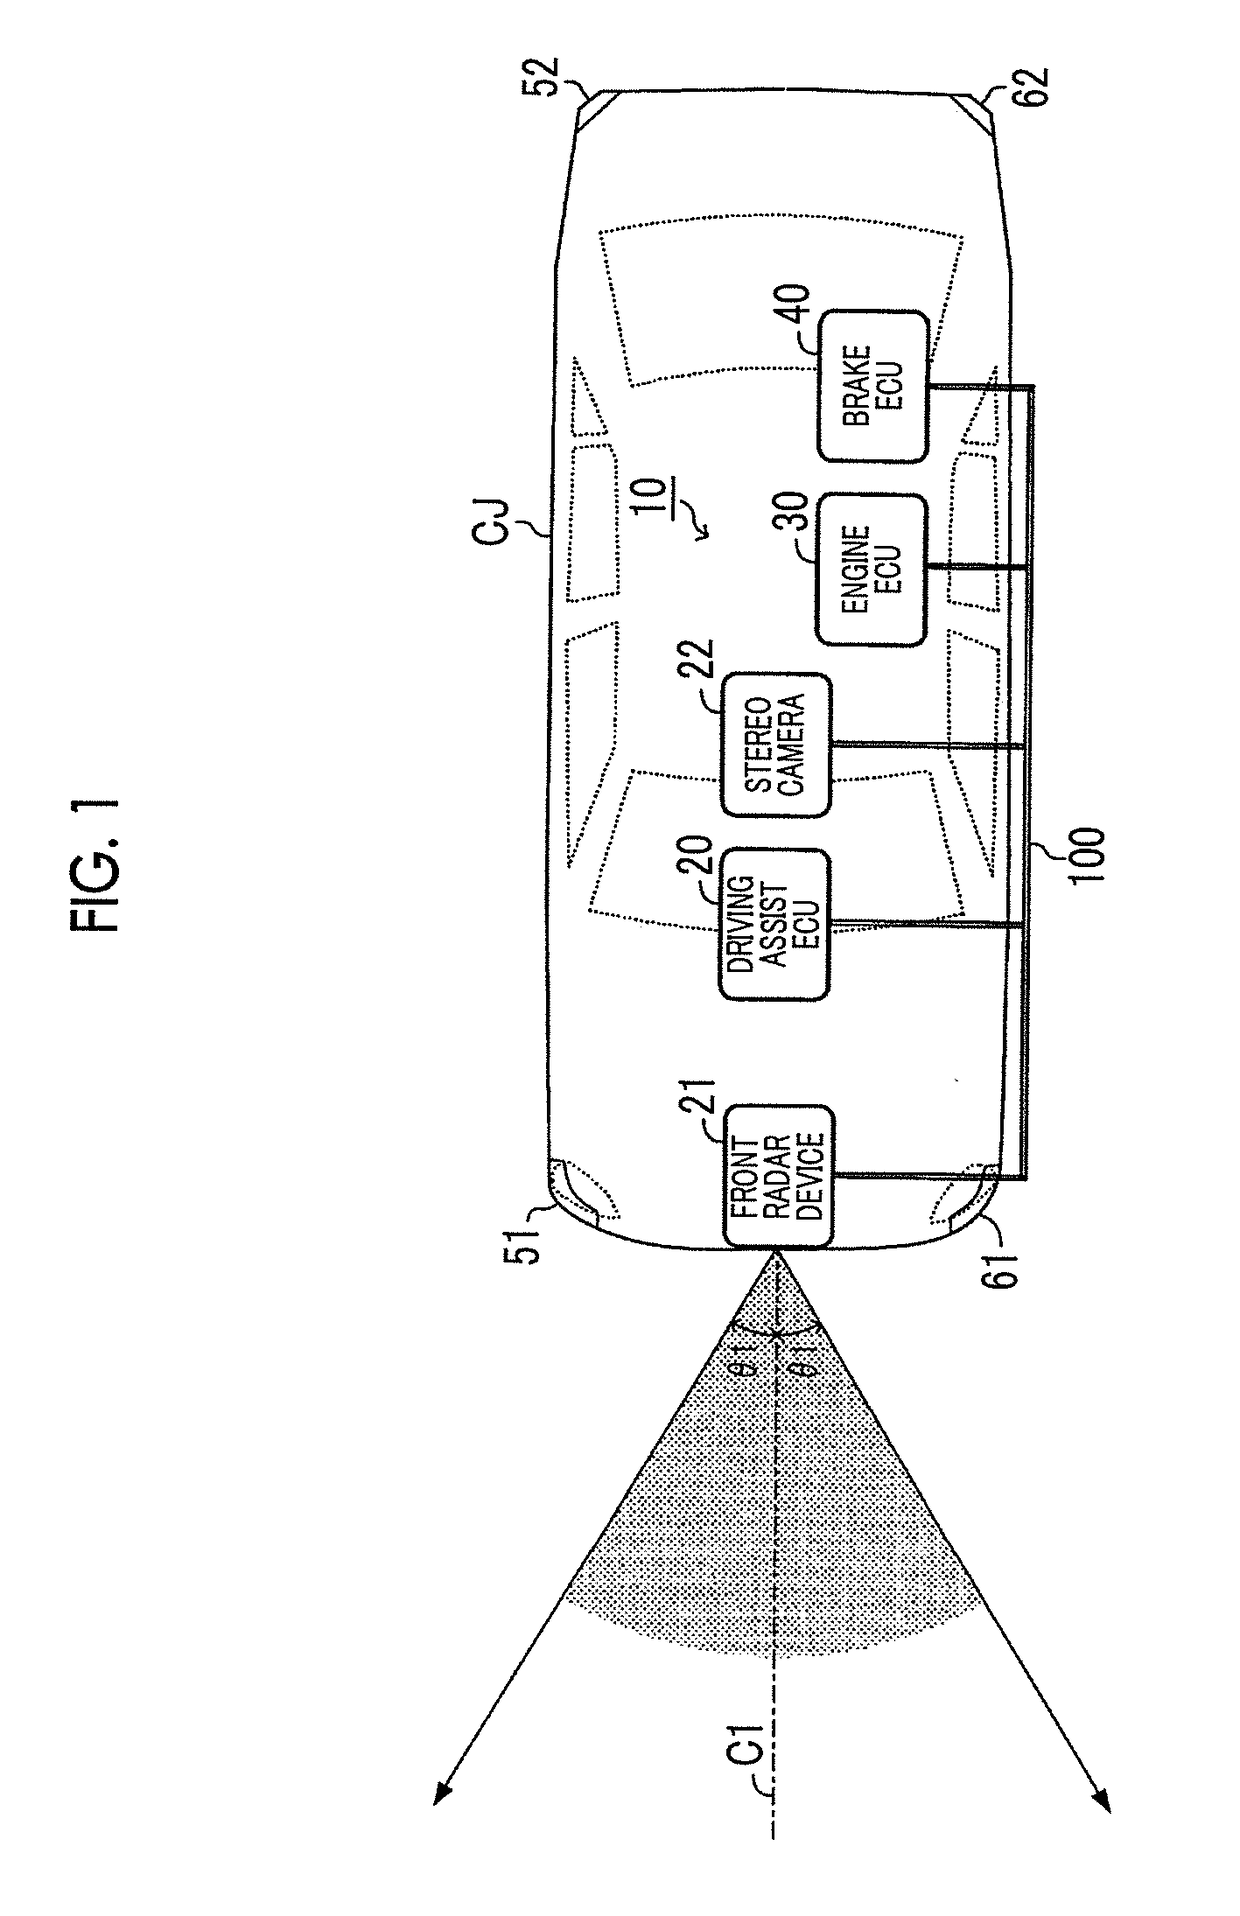 Vehicle traveling control device